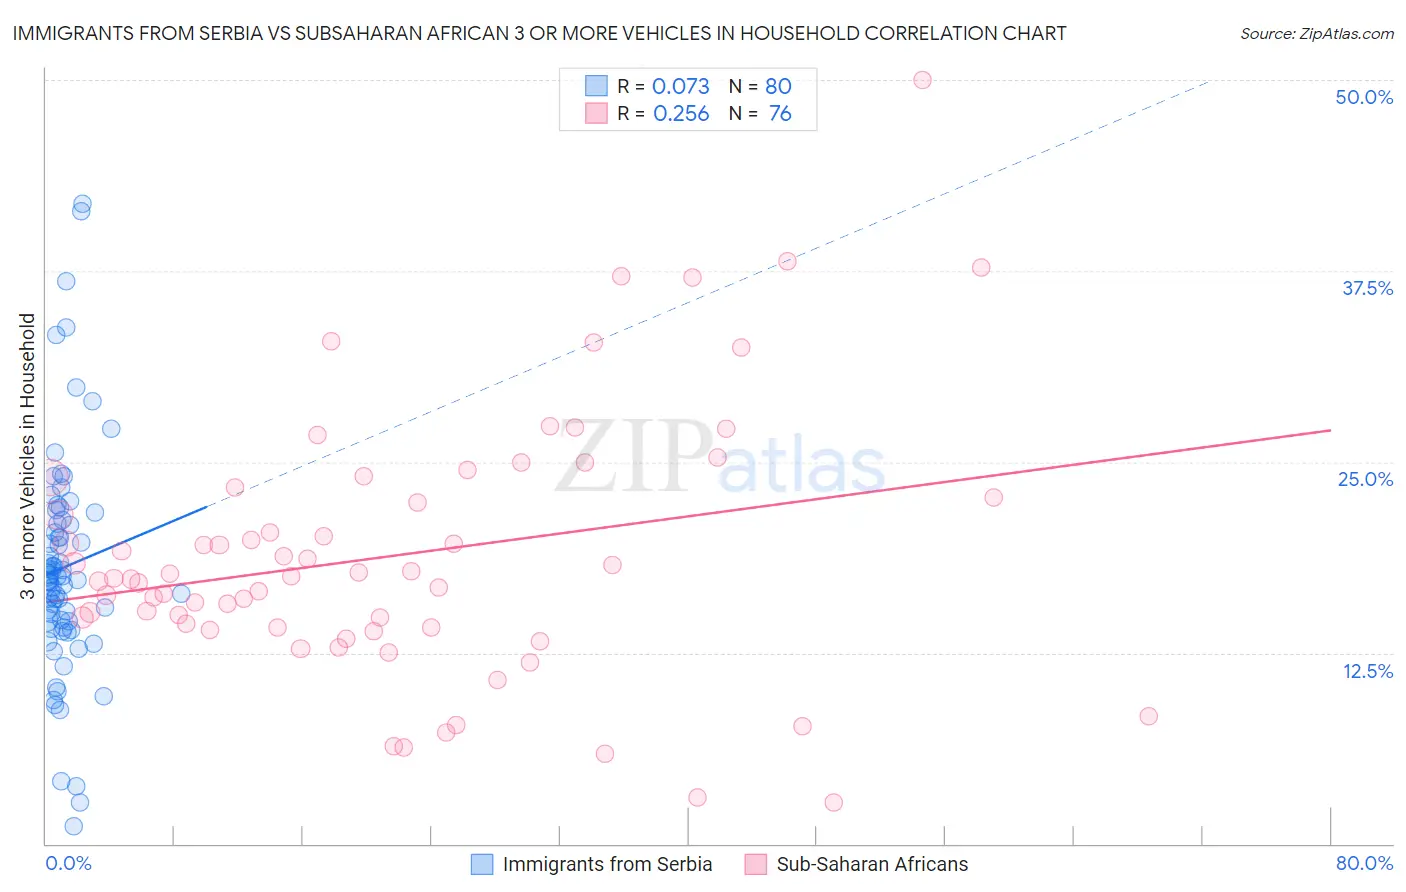 Immigrants from Serbia vs Subsaharan African 3 or more Vehicles in Household